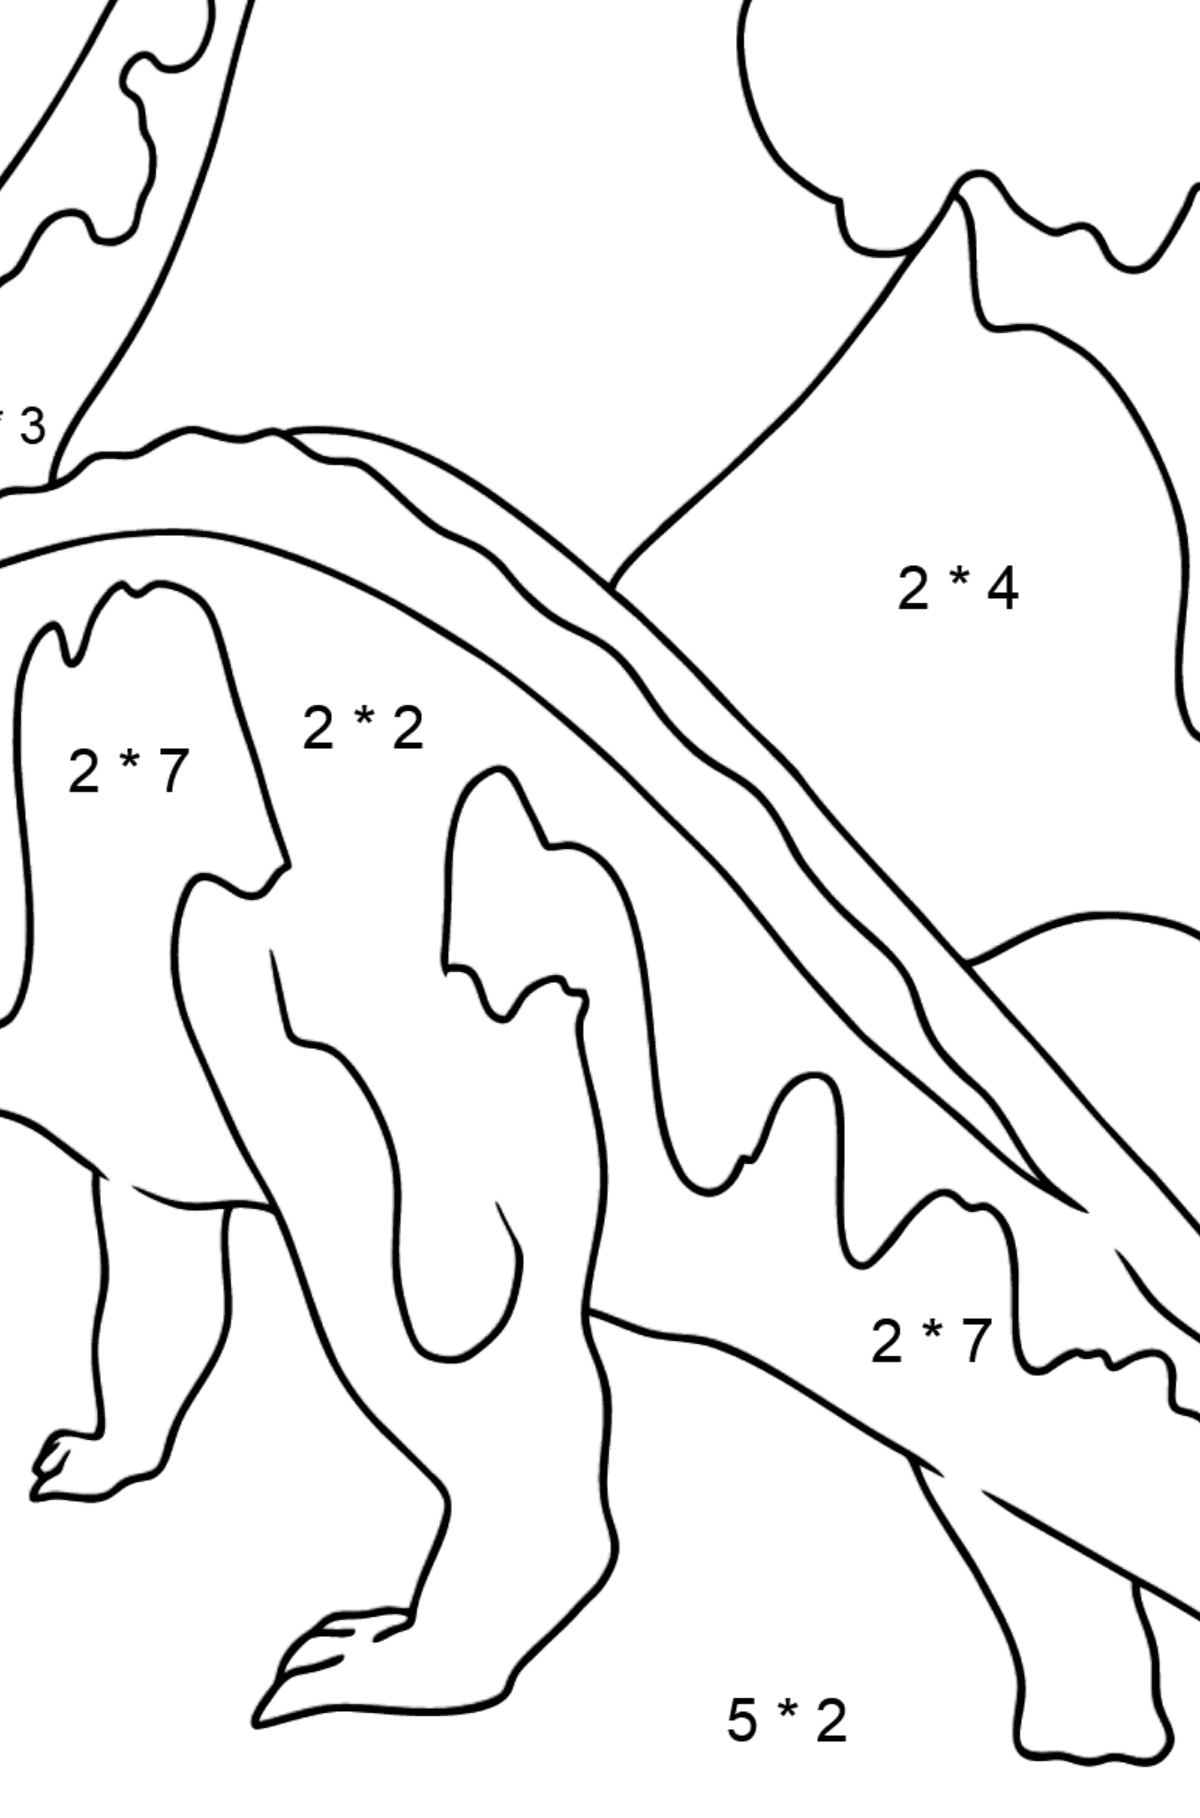 Brontosaurus Coloring Page - Math Coloring - Multiplication for Kids